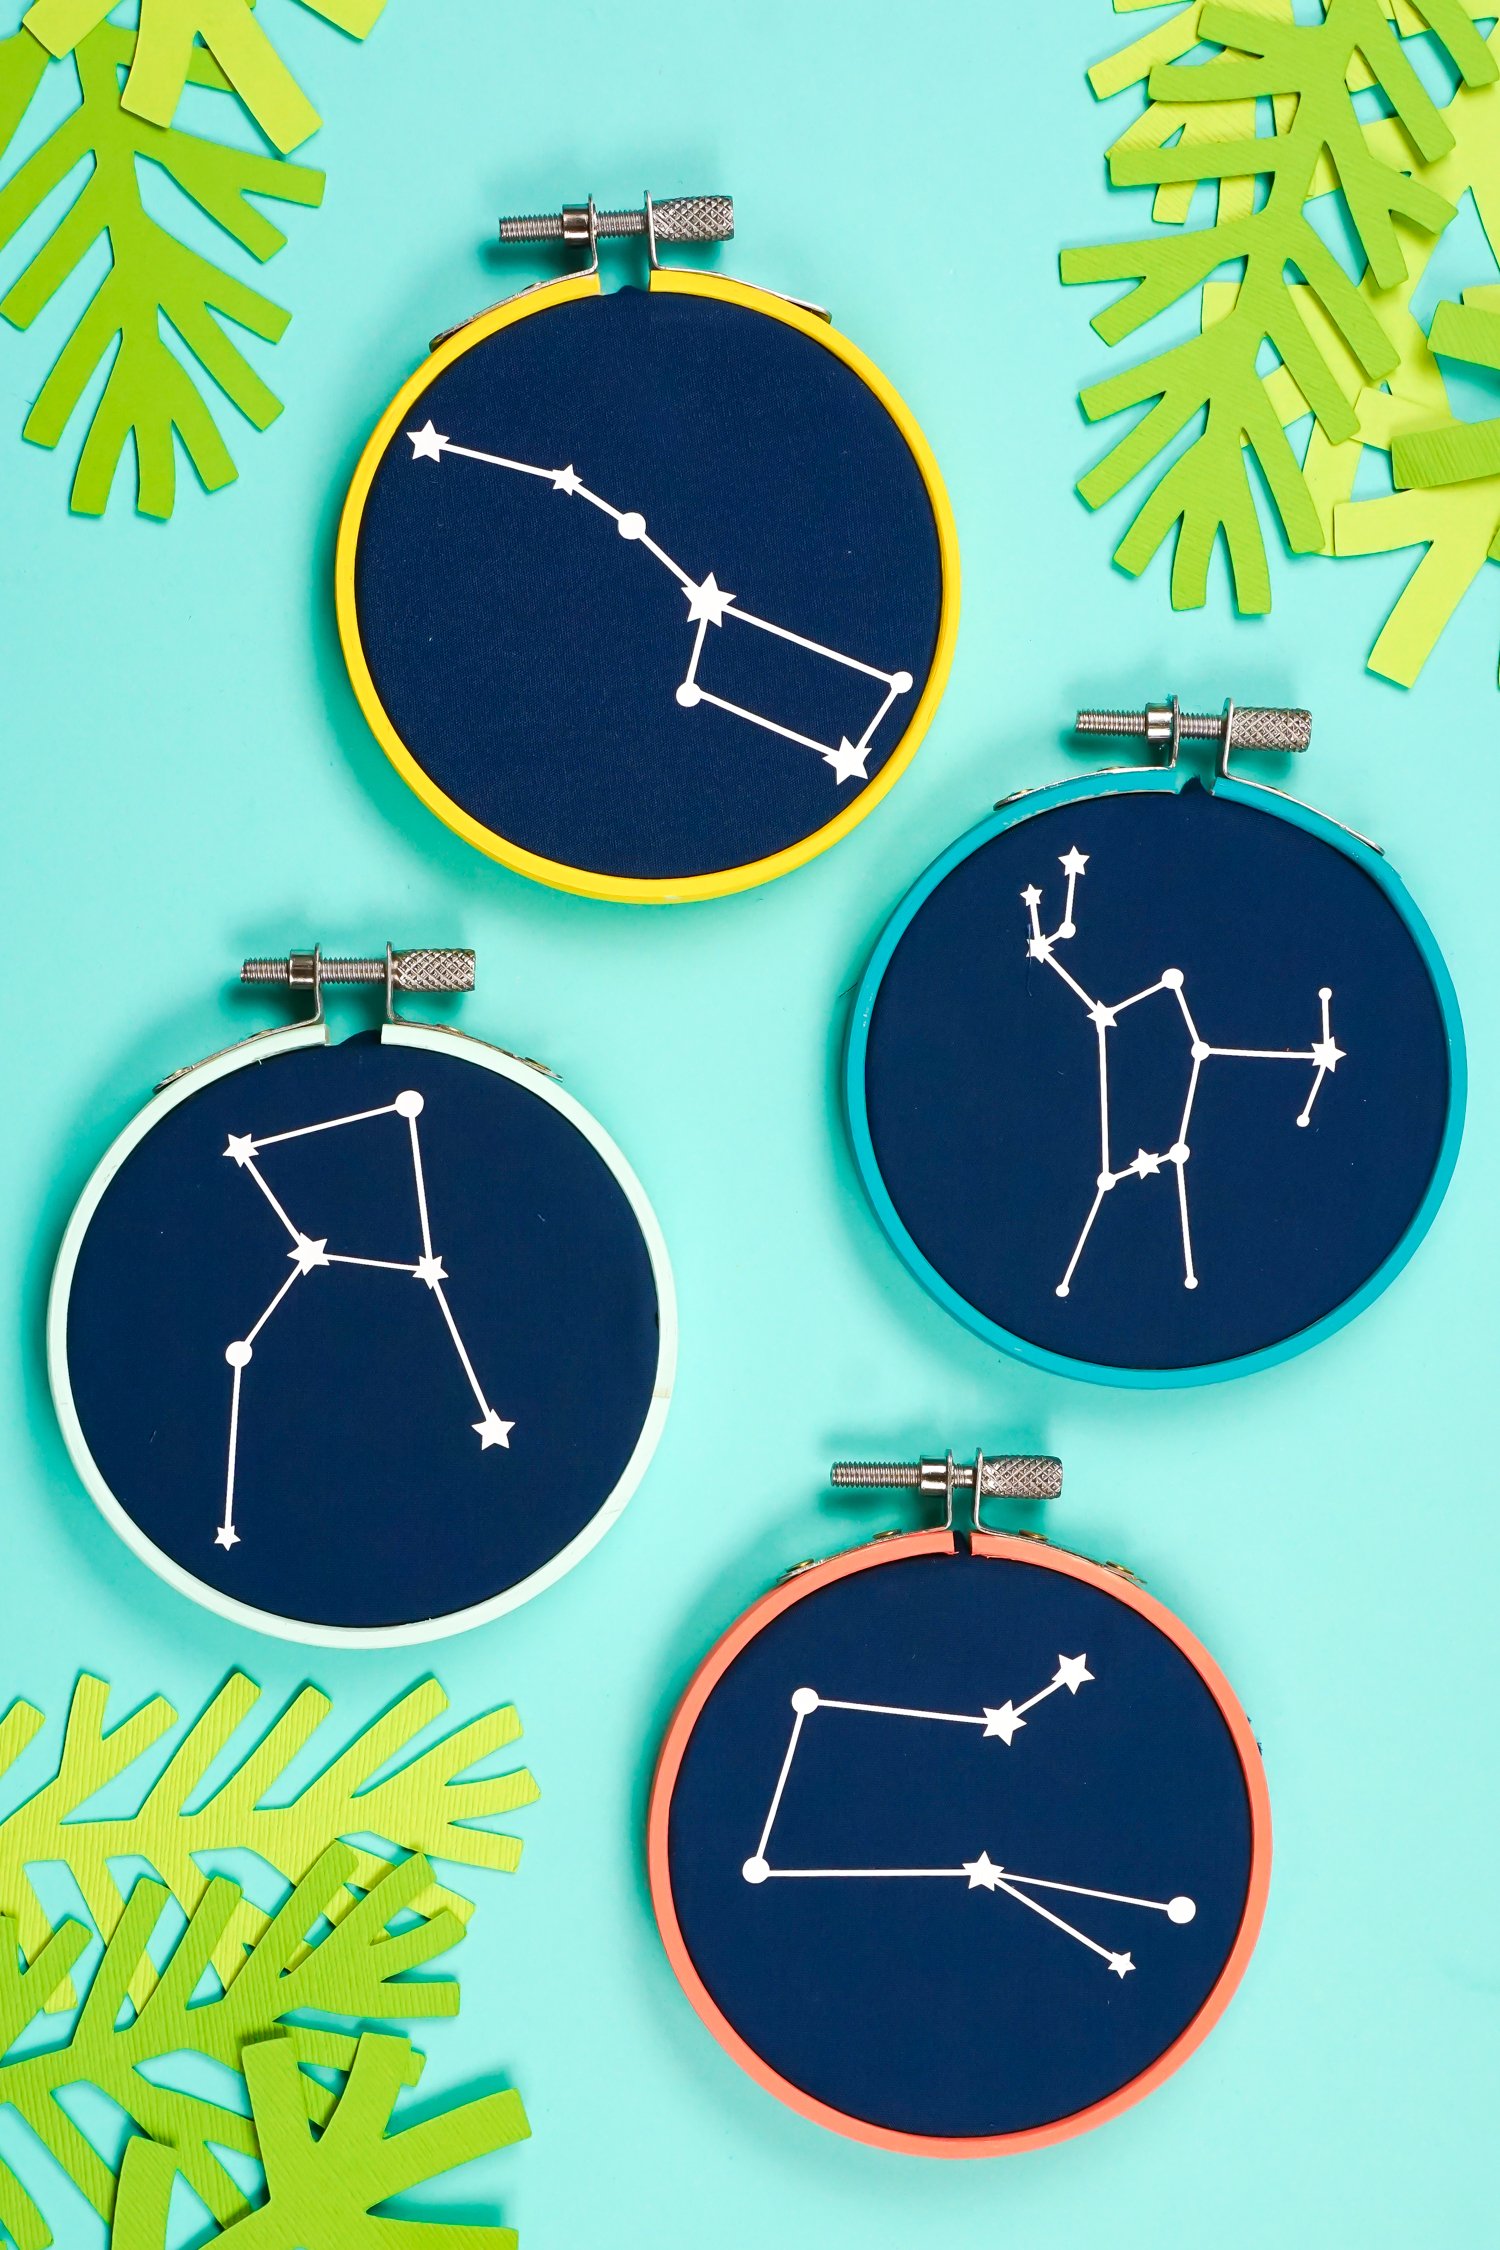 4 Pcs Mini Embroidery Hoops Ornaments Plastic Cross Stitch Daily Use